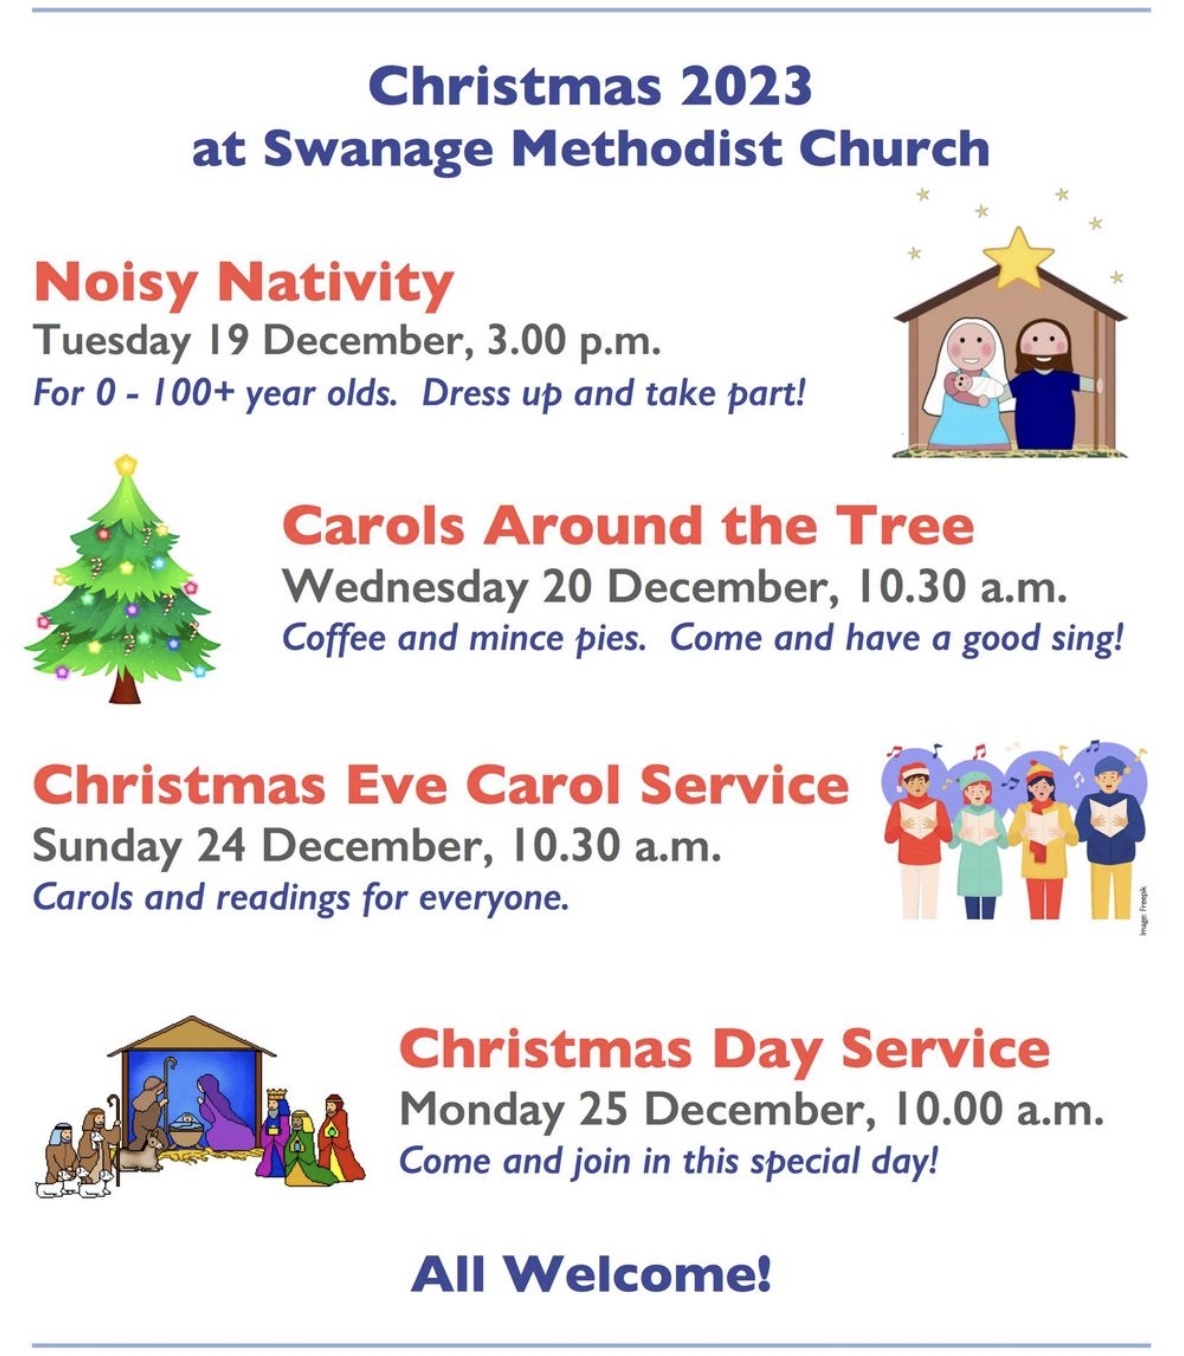 Swanage Methodist Church Christmas services poster